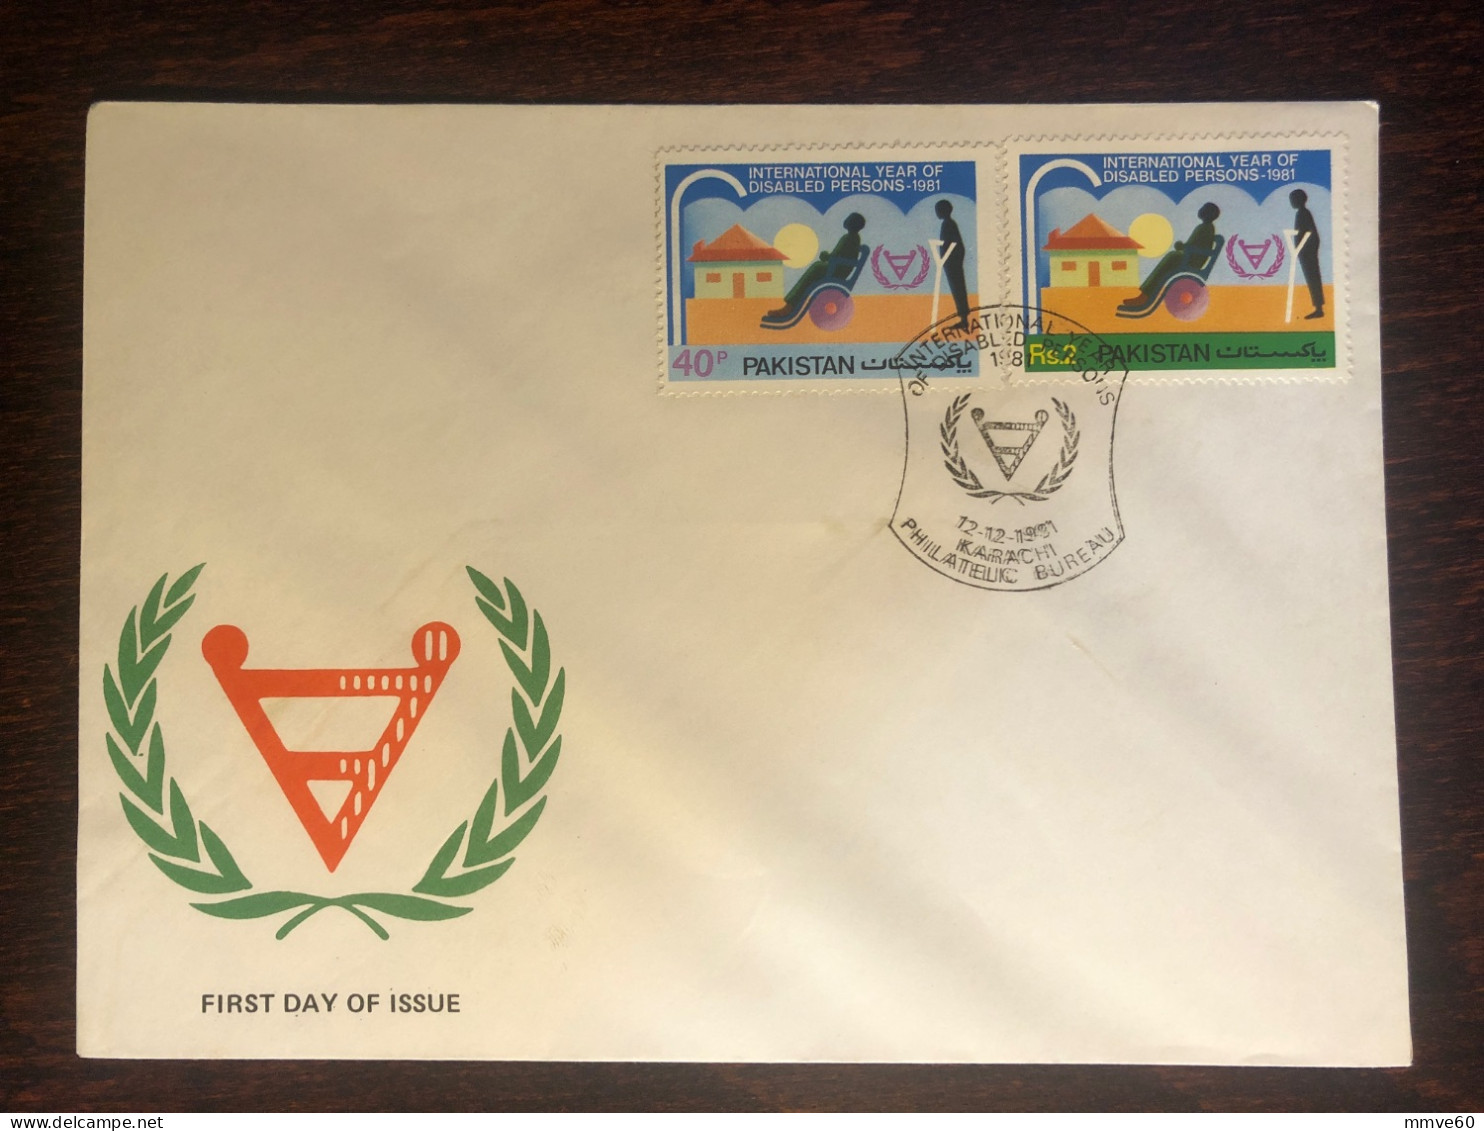 PAKISTAN FDC COVER 1981 YEAR DISABLED PEOPLE HEALTH MEDICINE STAMPS - Pakistan